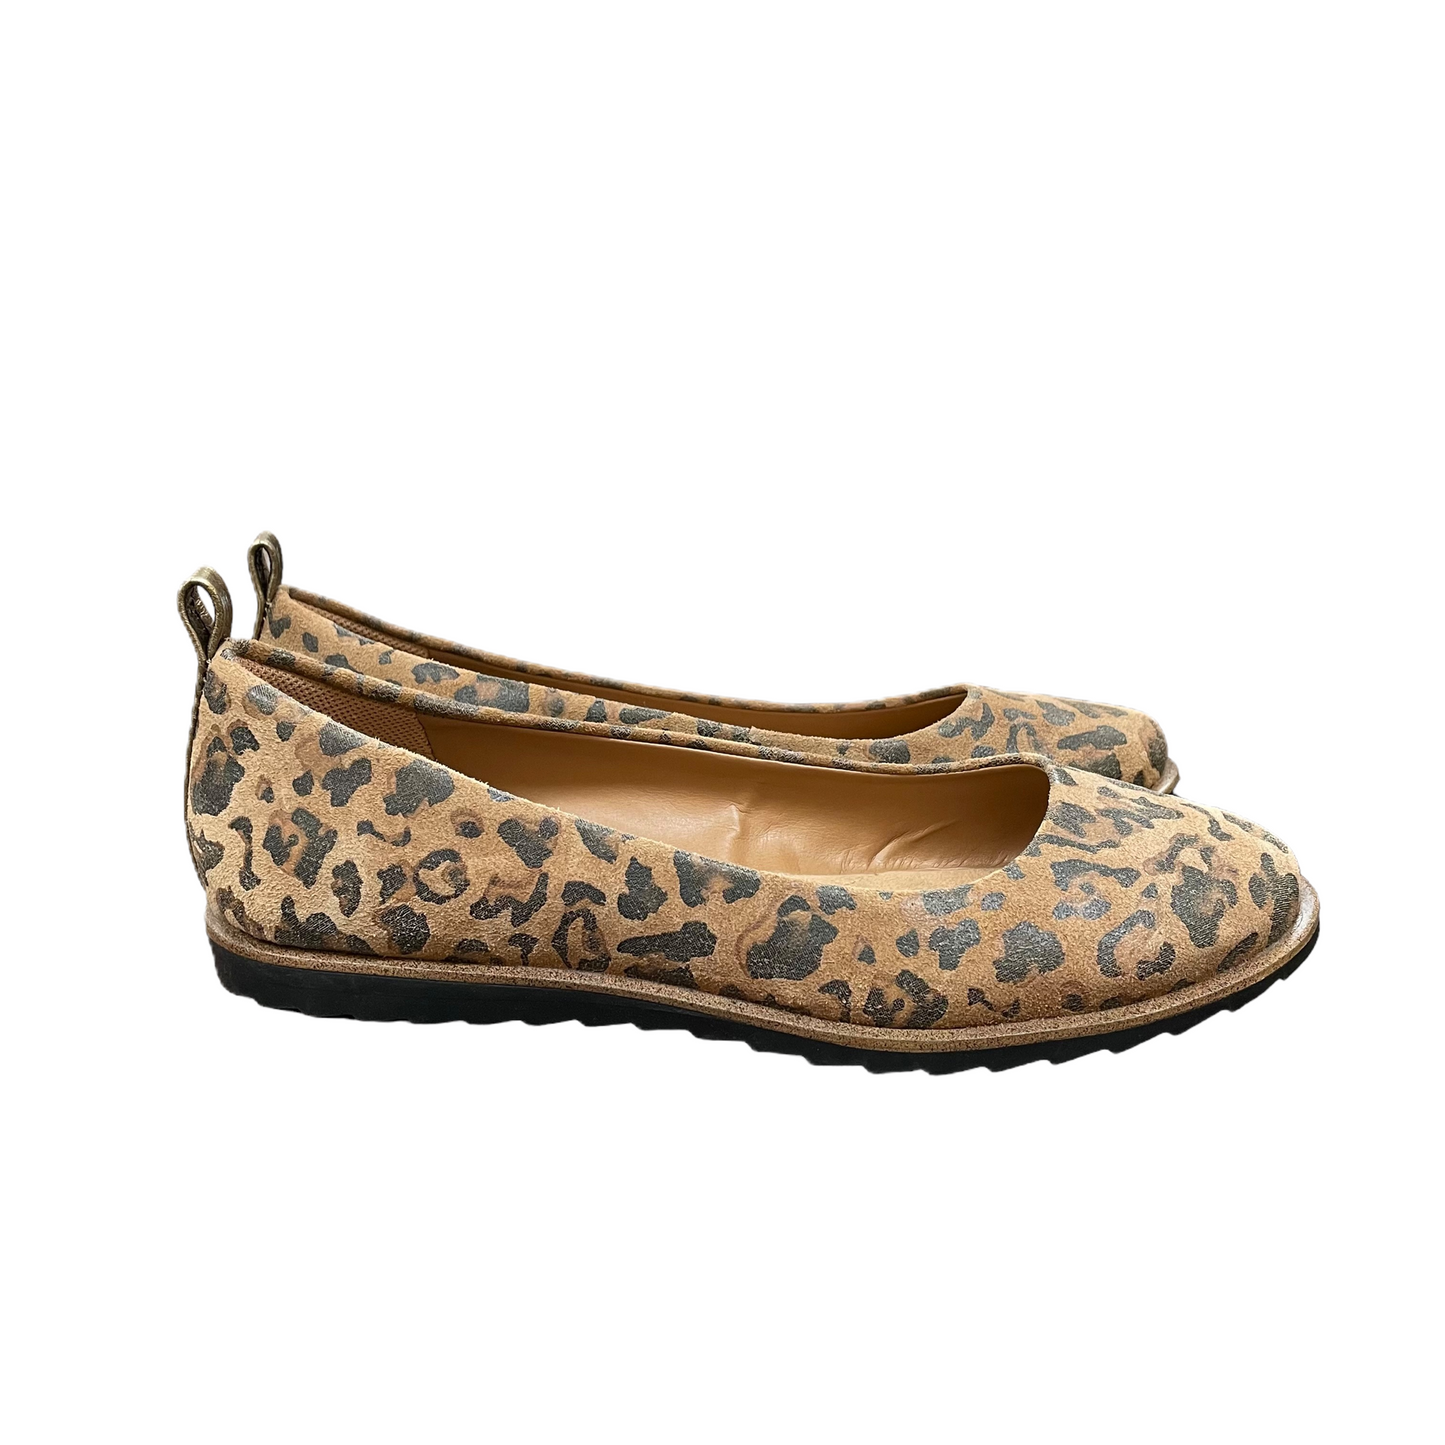 Animal Print Shoes Flats By Comfortiva, Size: 7